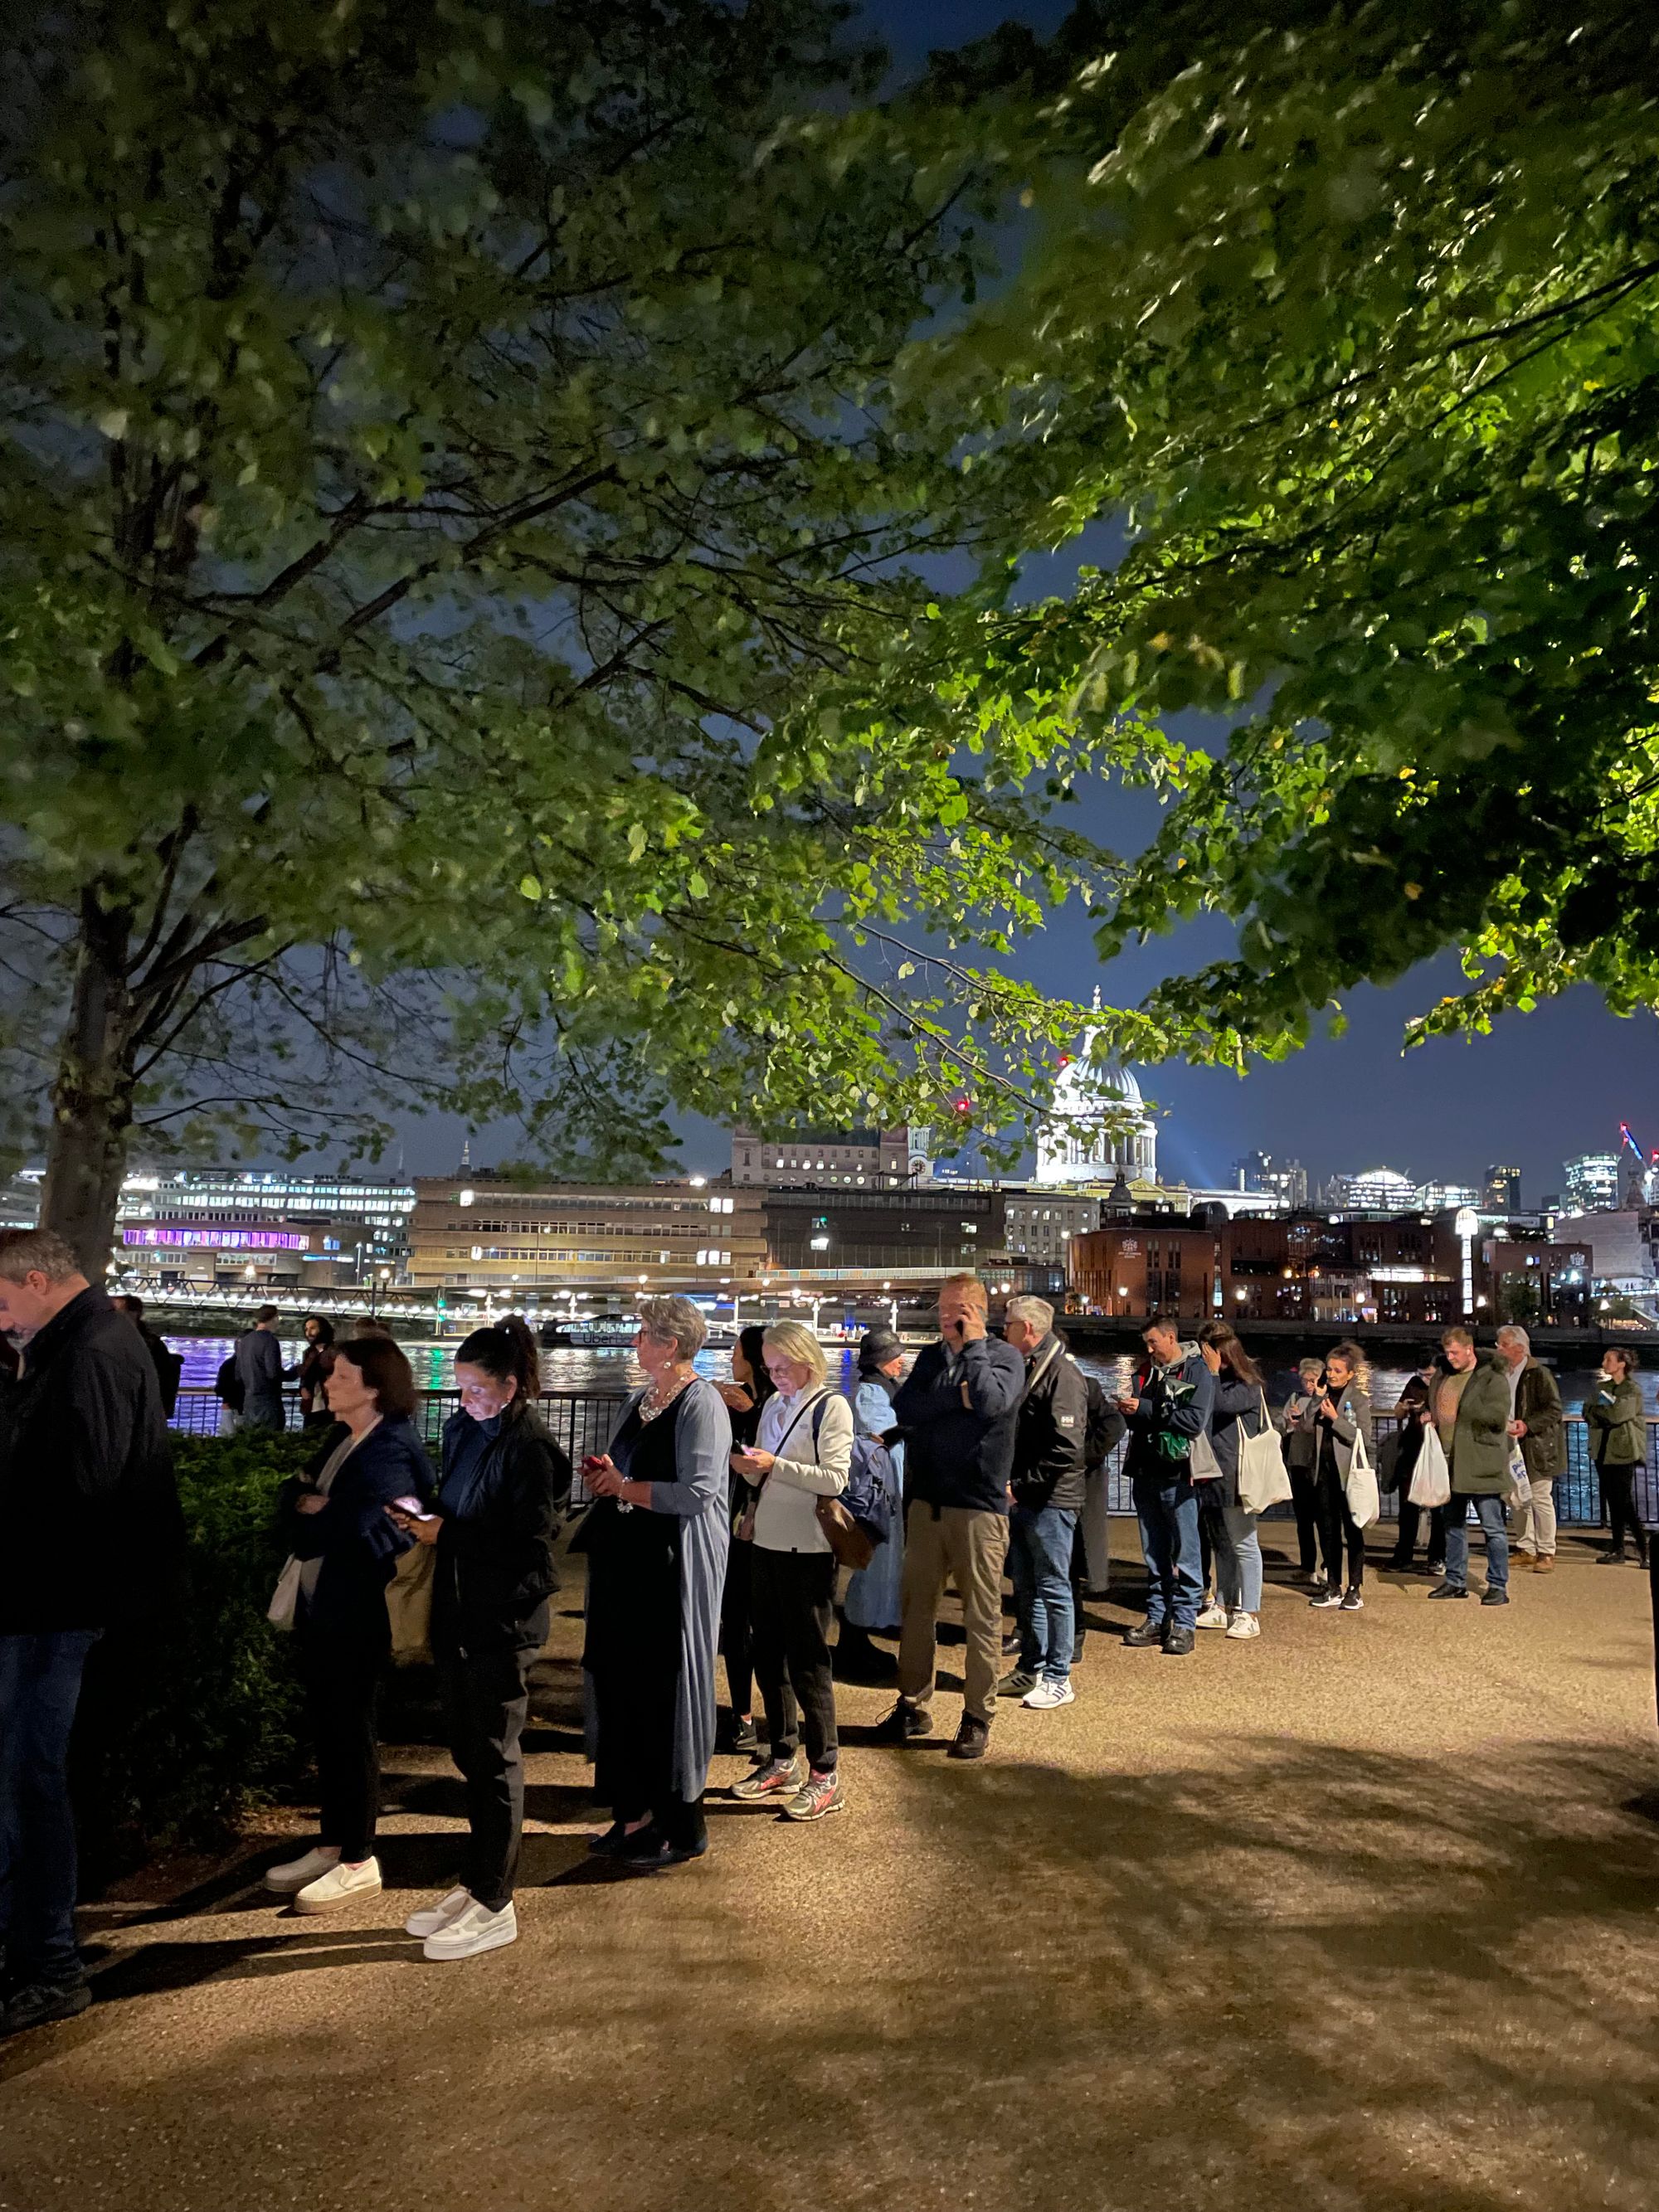 The Queue with St Paul's Cathedral in the background.